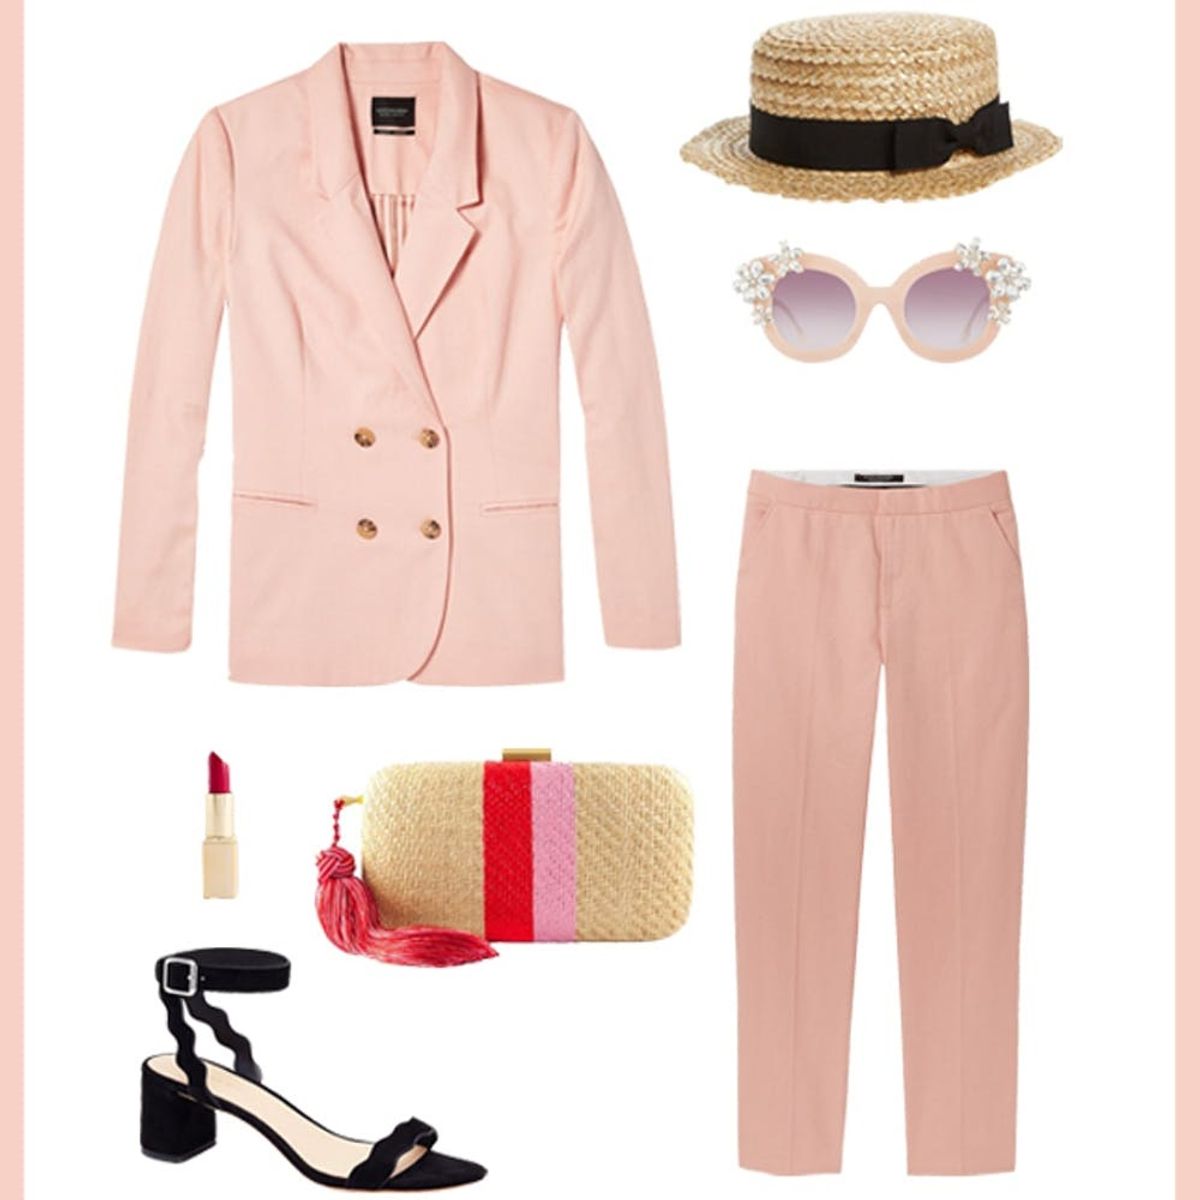 4 #Winning Derby-Inspired Looks for Every Style